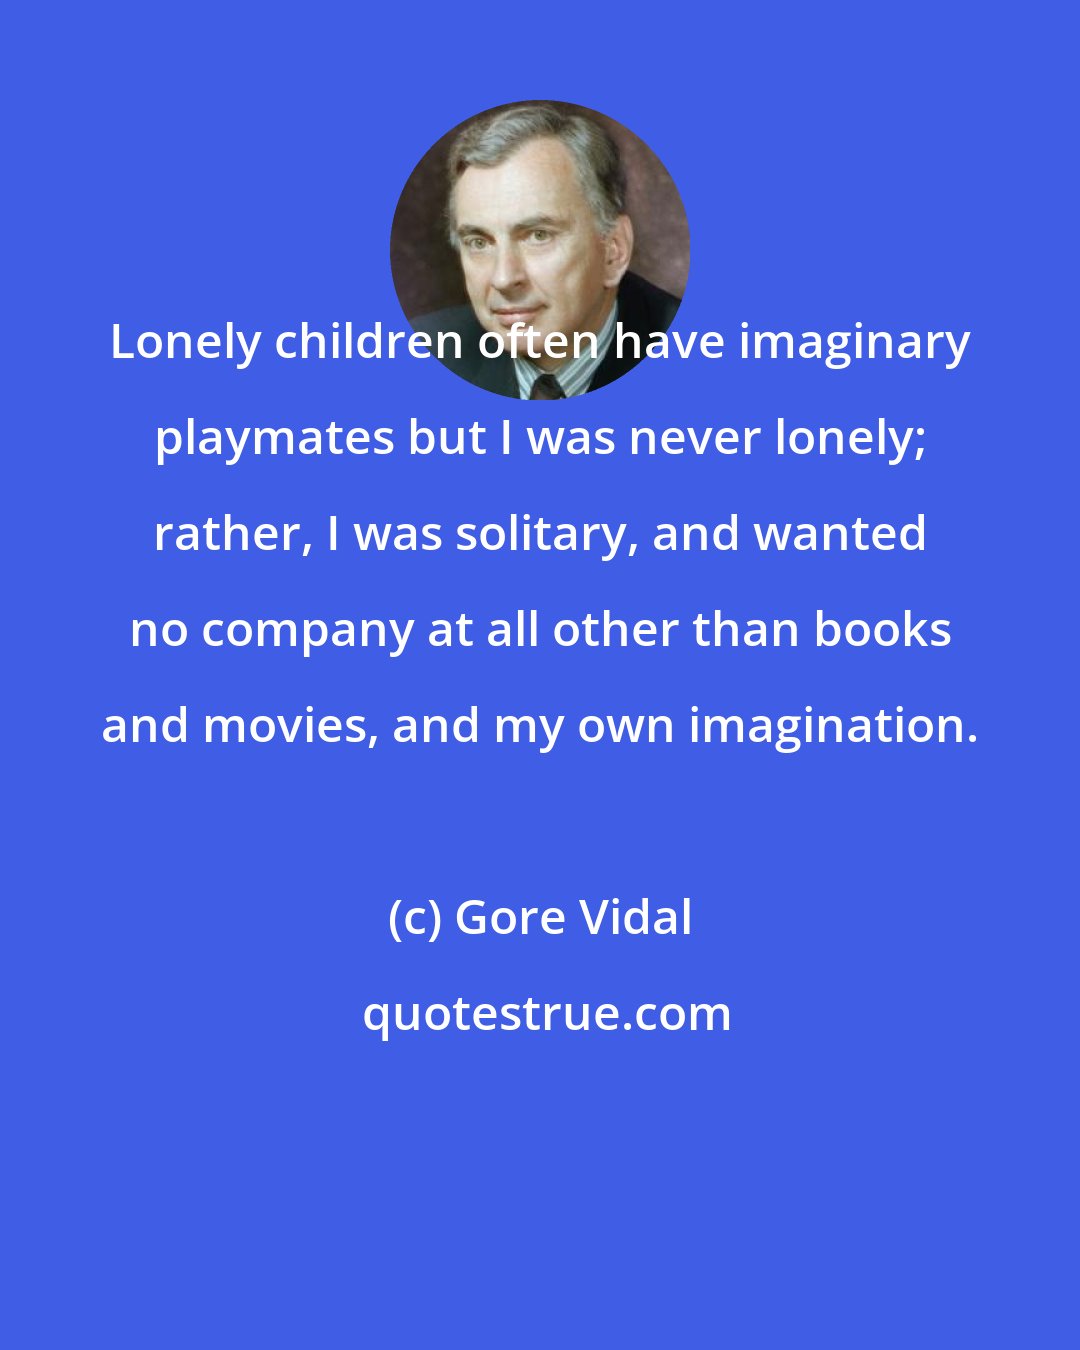 Gore Vidal: Lonely children often have imaginary playmates but I was never lonely; rather, I was solitary, and wanted no company at all other than books and movies, and my own imagination.